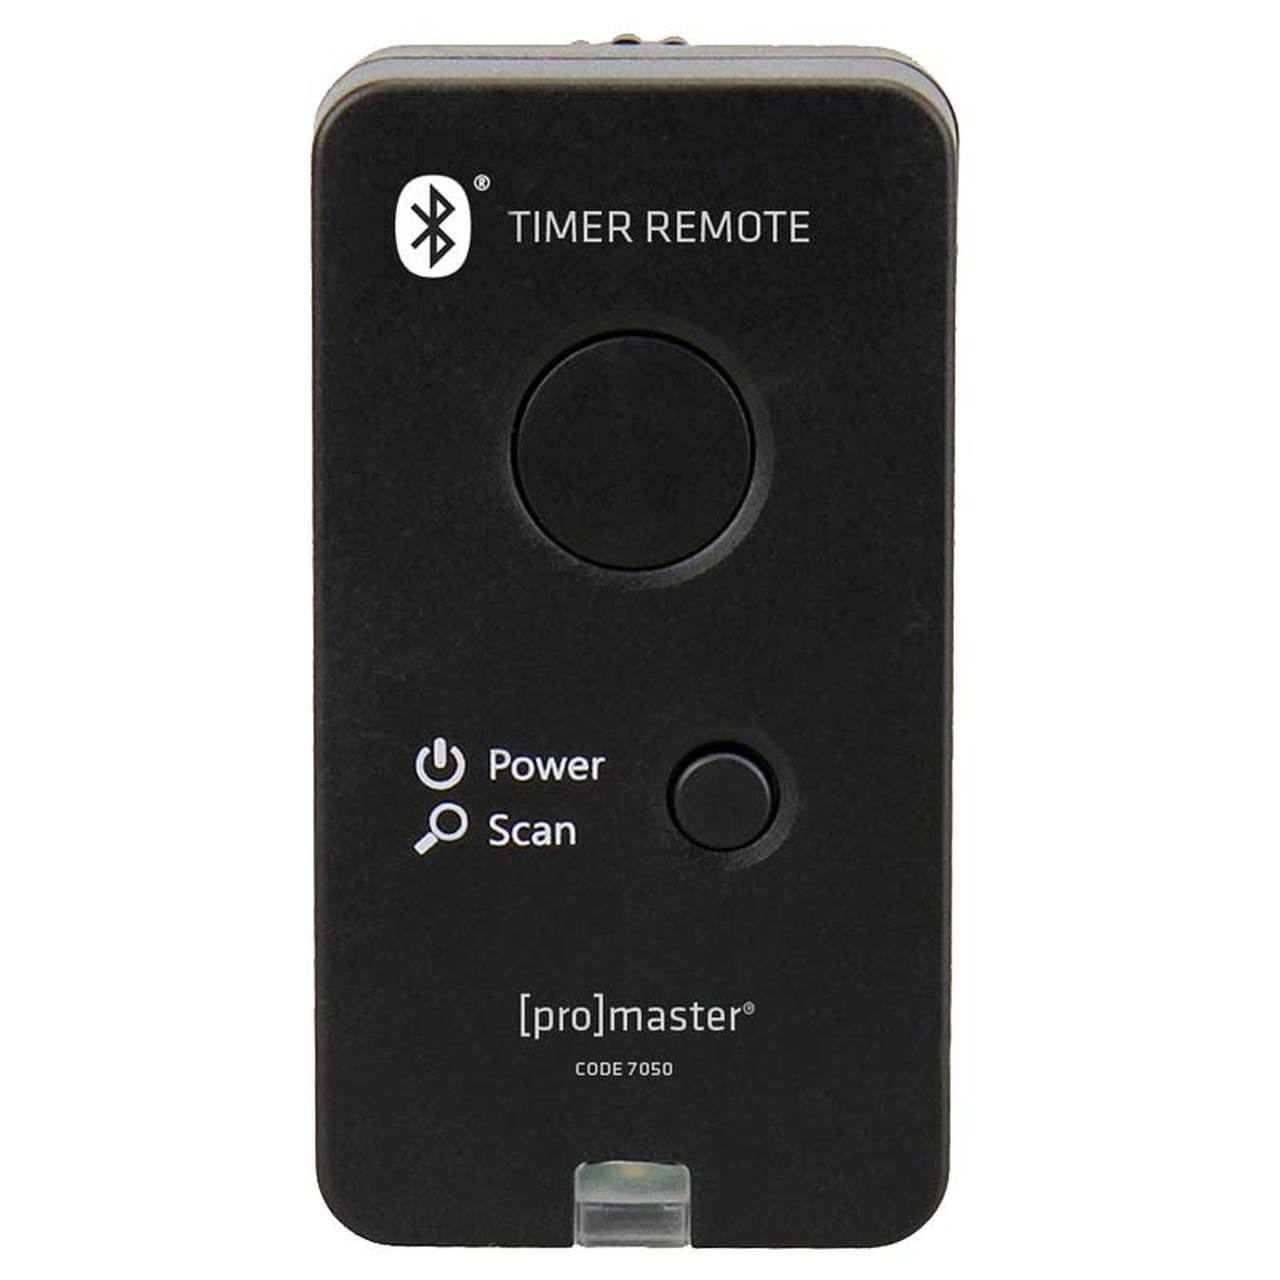 Promaster 7050 Bluetooth Timer Remote for "i" Devices